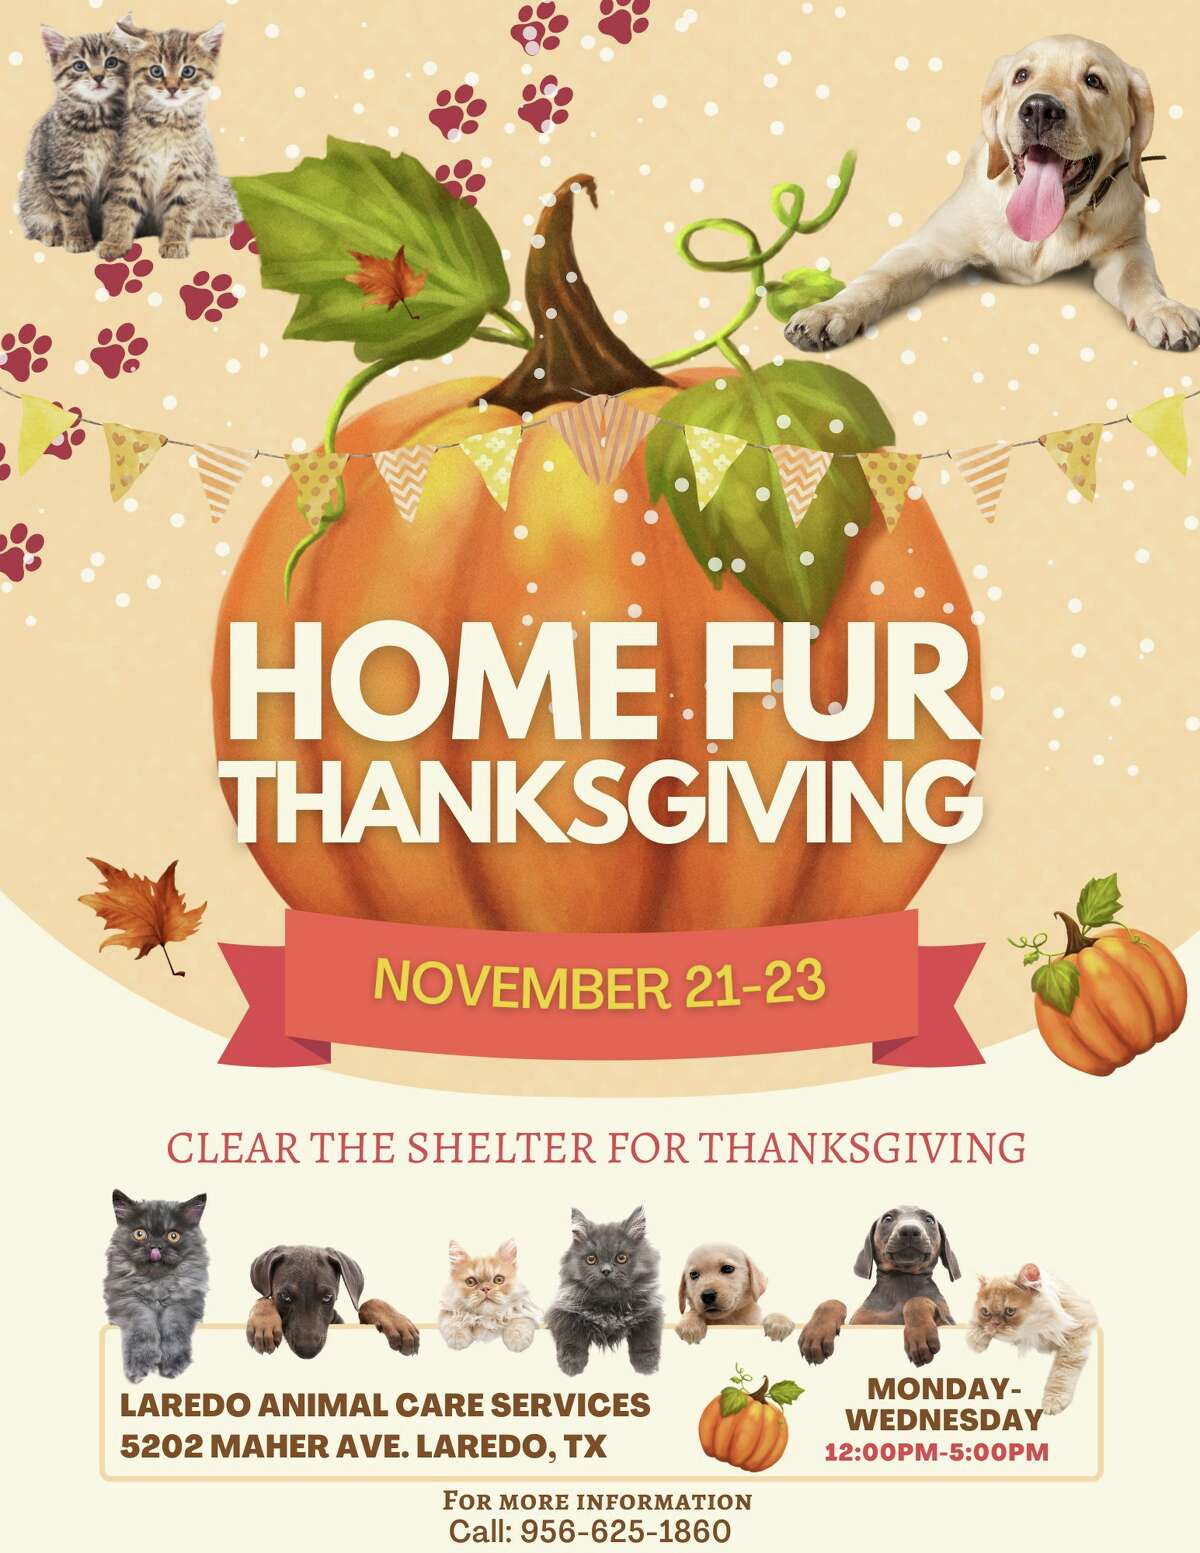 Laredo Animal Care Services is holding a "Home Fur Thanksgiving" free adoption and fostering event Nov. 21-23.